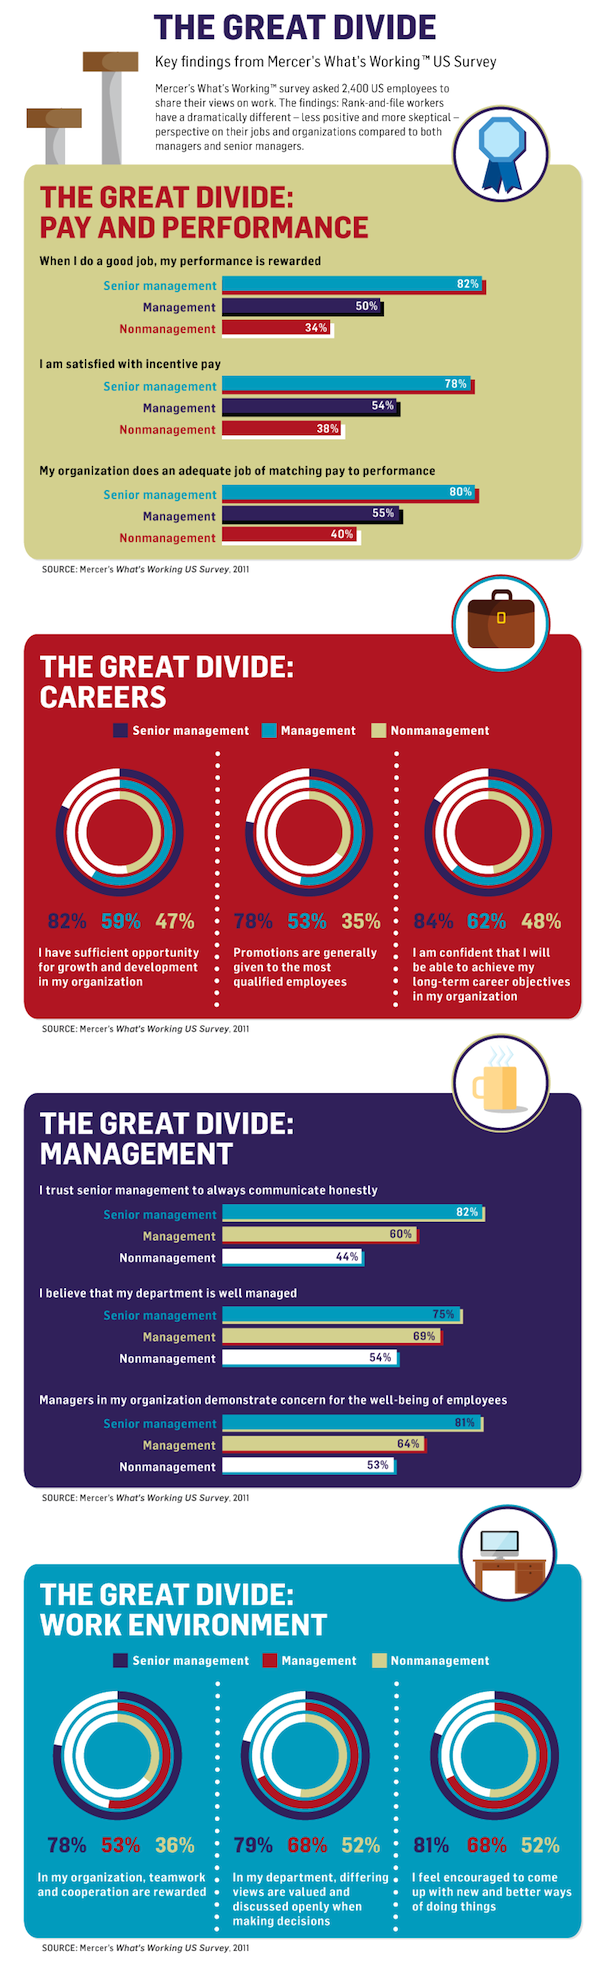 Work Motivation: Managers vs. Employees [INFOGRAPHIC]